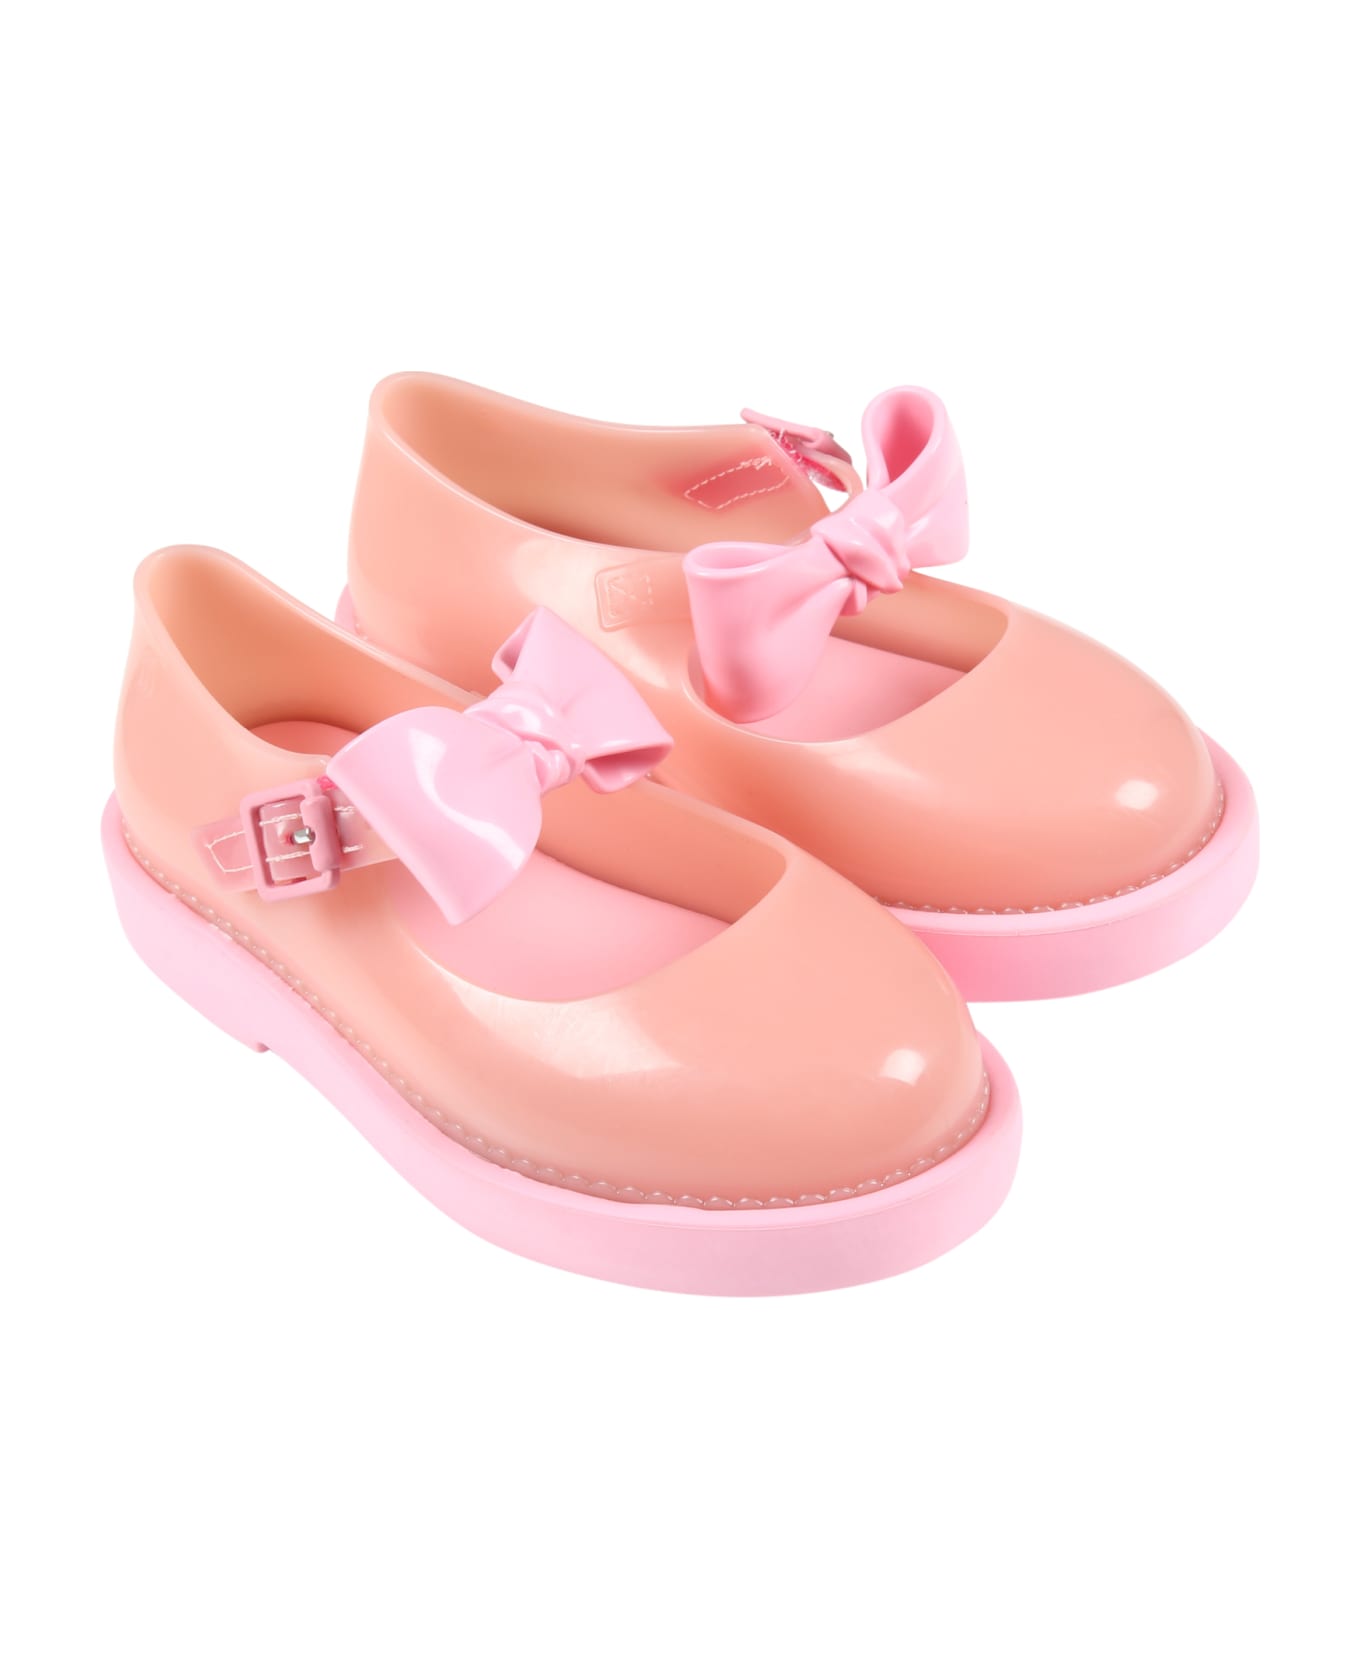 Melissa Pink Ballerina-flats For Girl With Bow - Pink シューズ